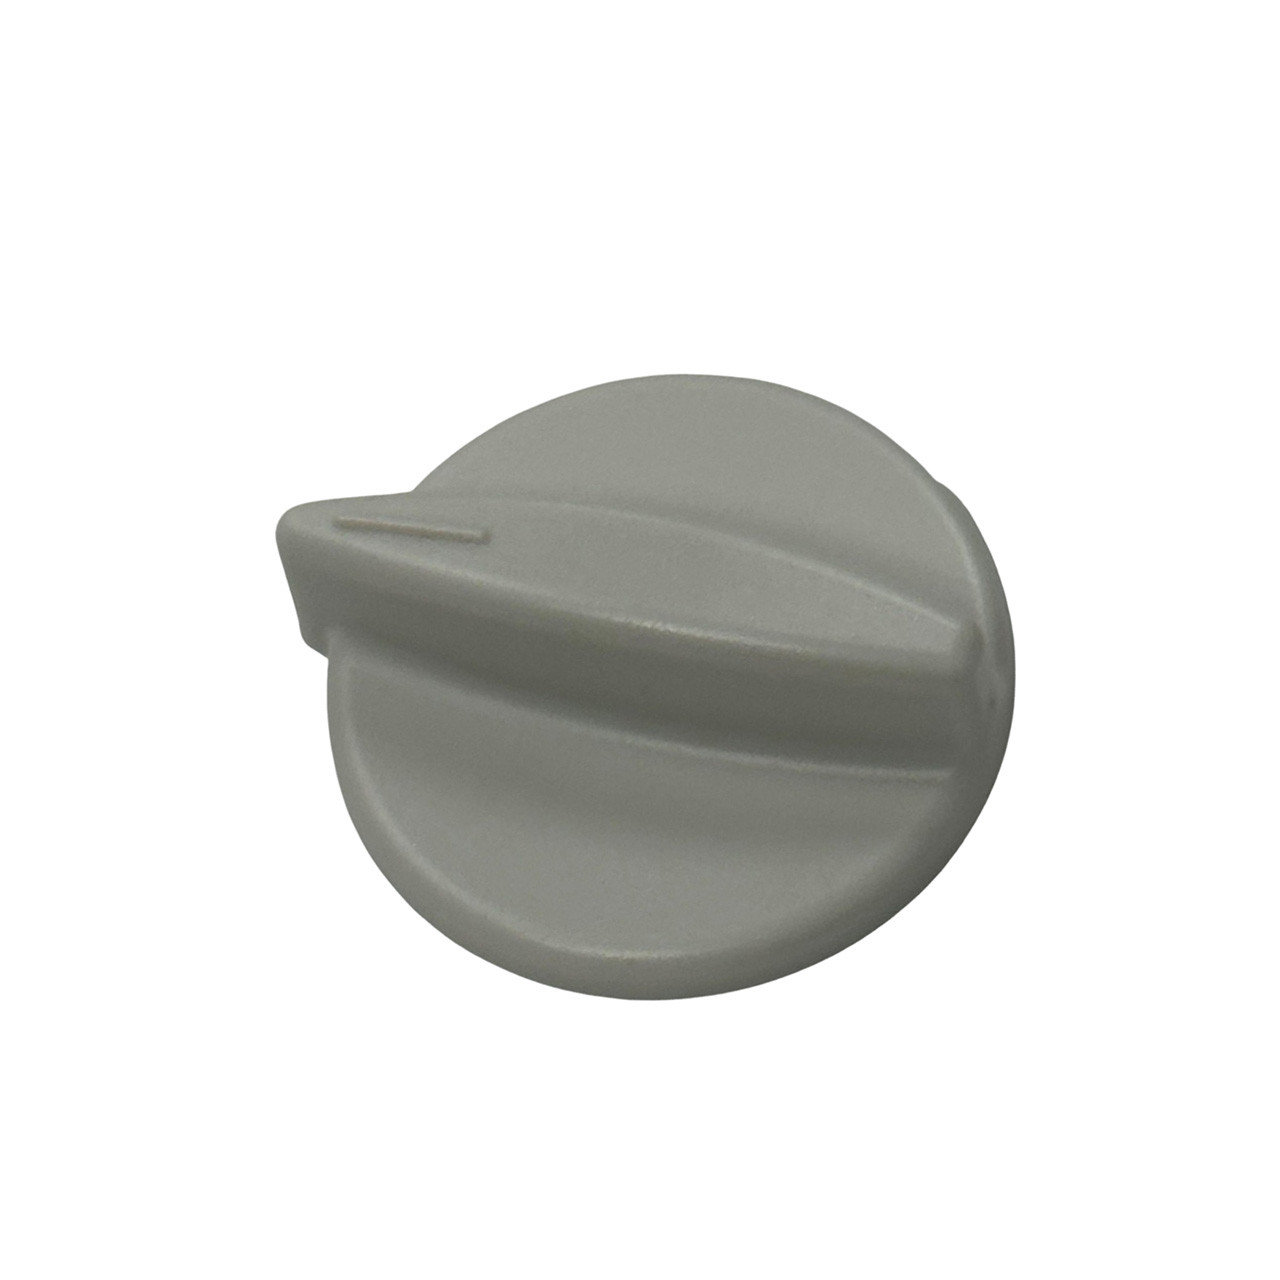 Repl. Knob for Best Built Ultrasonic Cleaners - Analog only